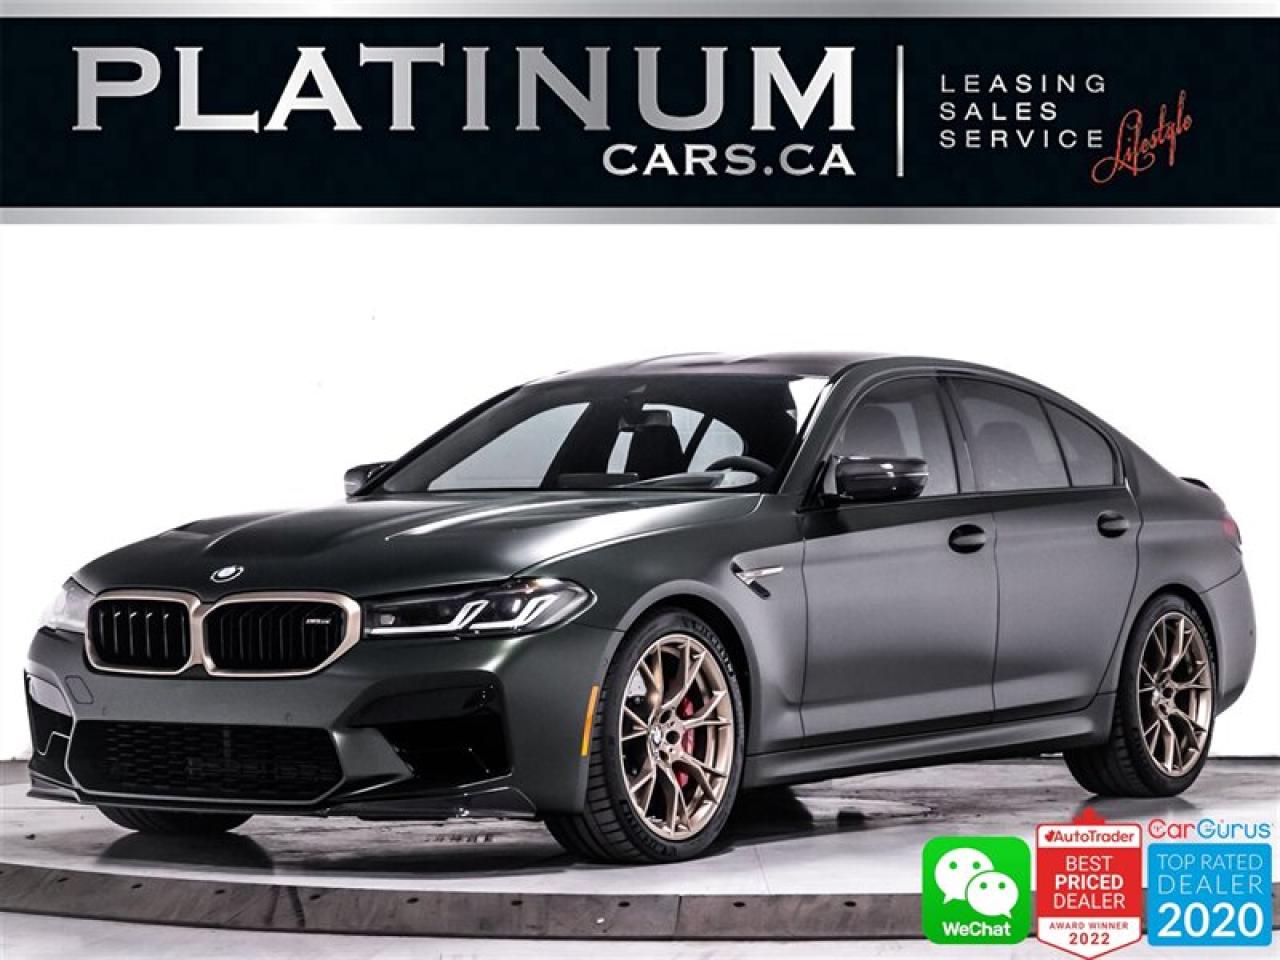 Used 2022 BMW M5 CS, 627HP, V8, AWD, FROZEN DEEP GREEN, CARBON